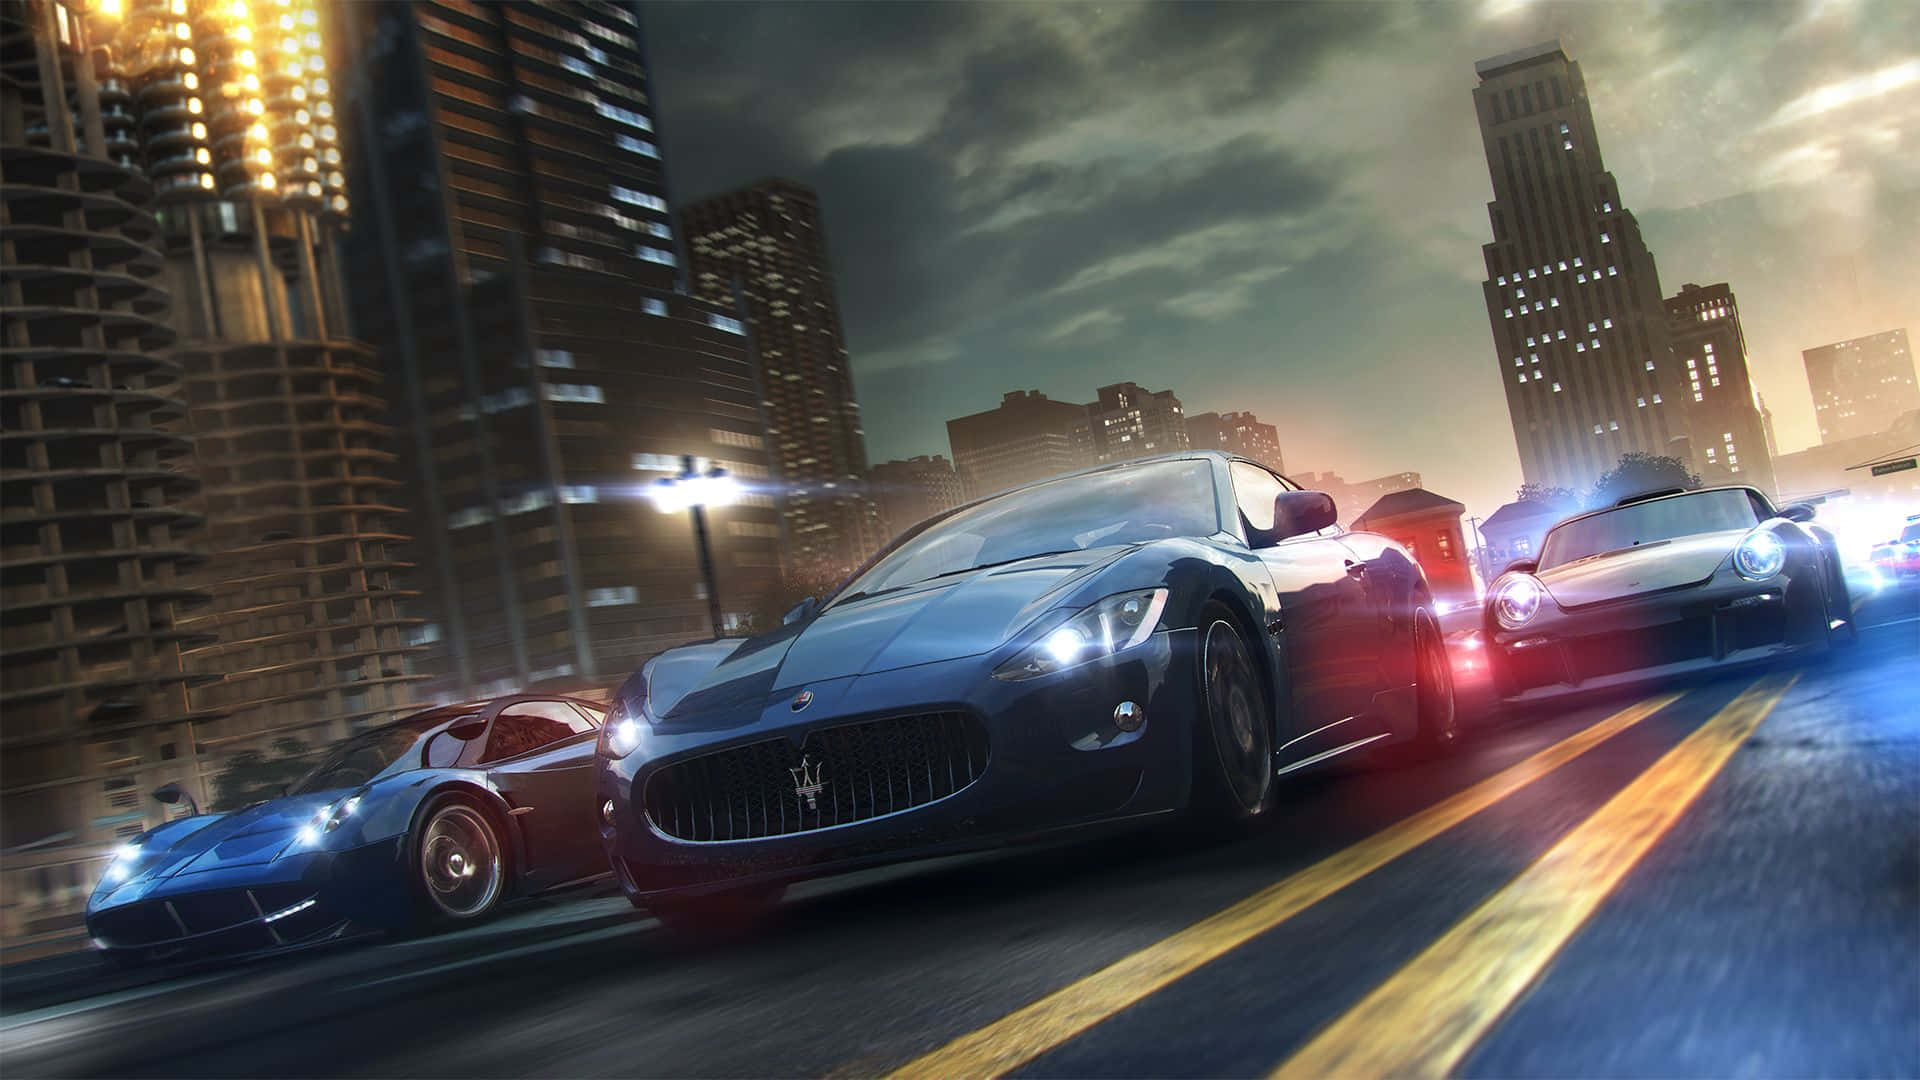 Captivating Racing Game in Action Wallpaper